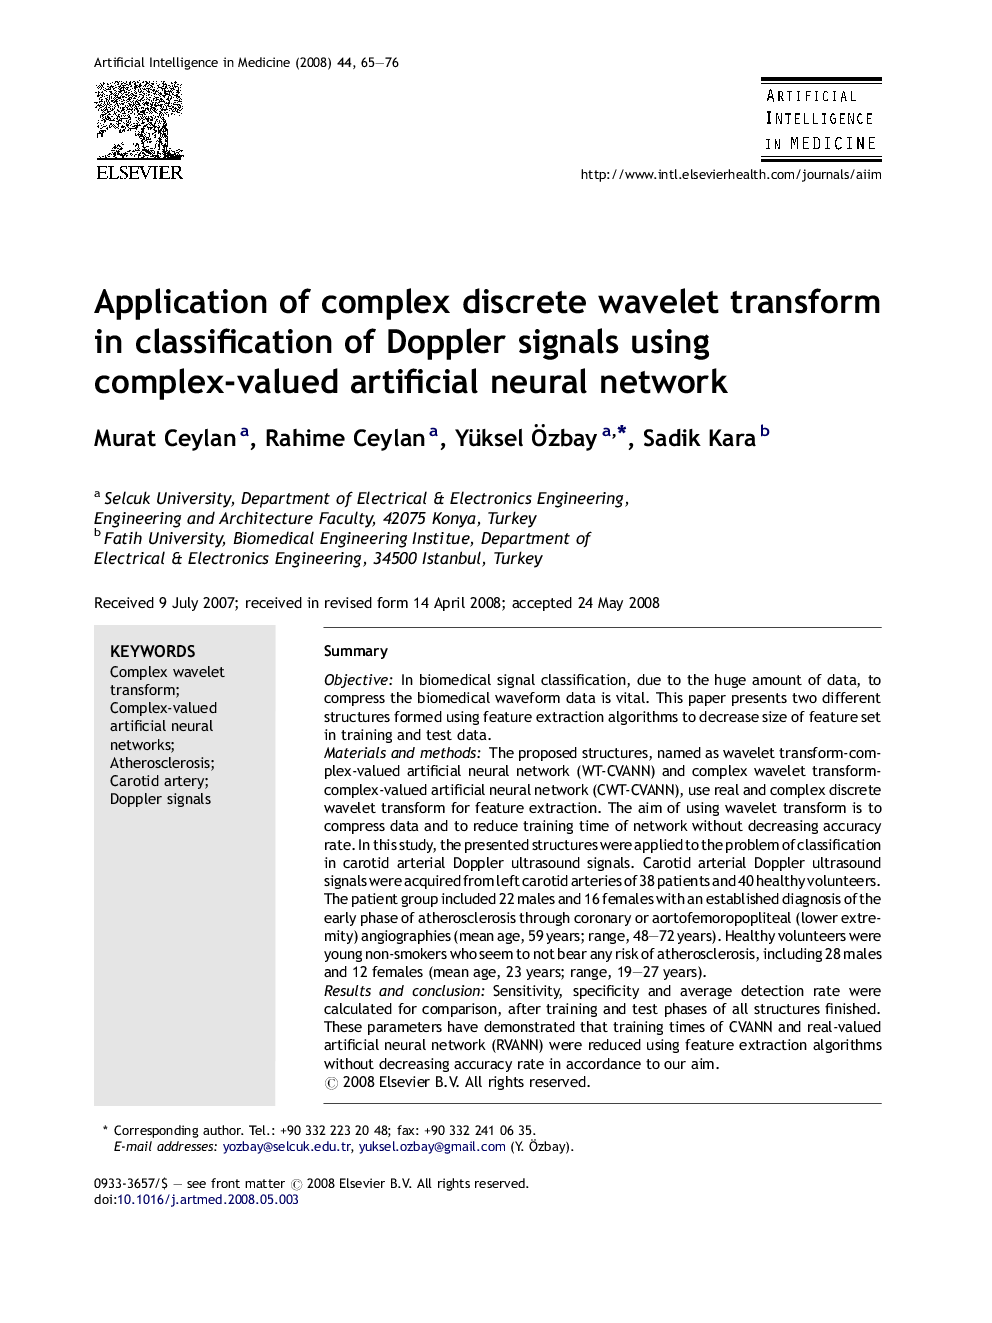 Application of complex discrete wavelet transform in classification of Doppler signals using complex-valued artificial neural network